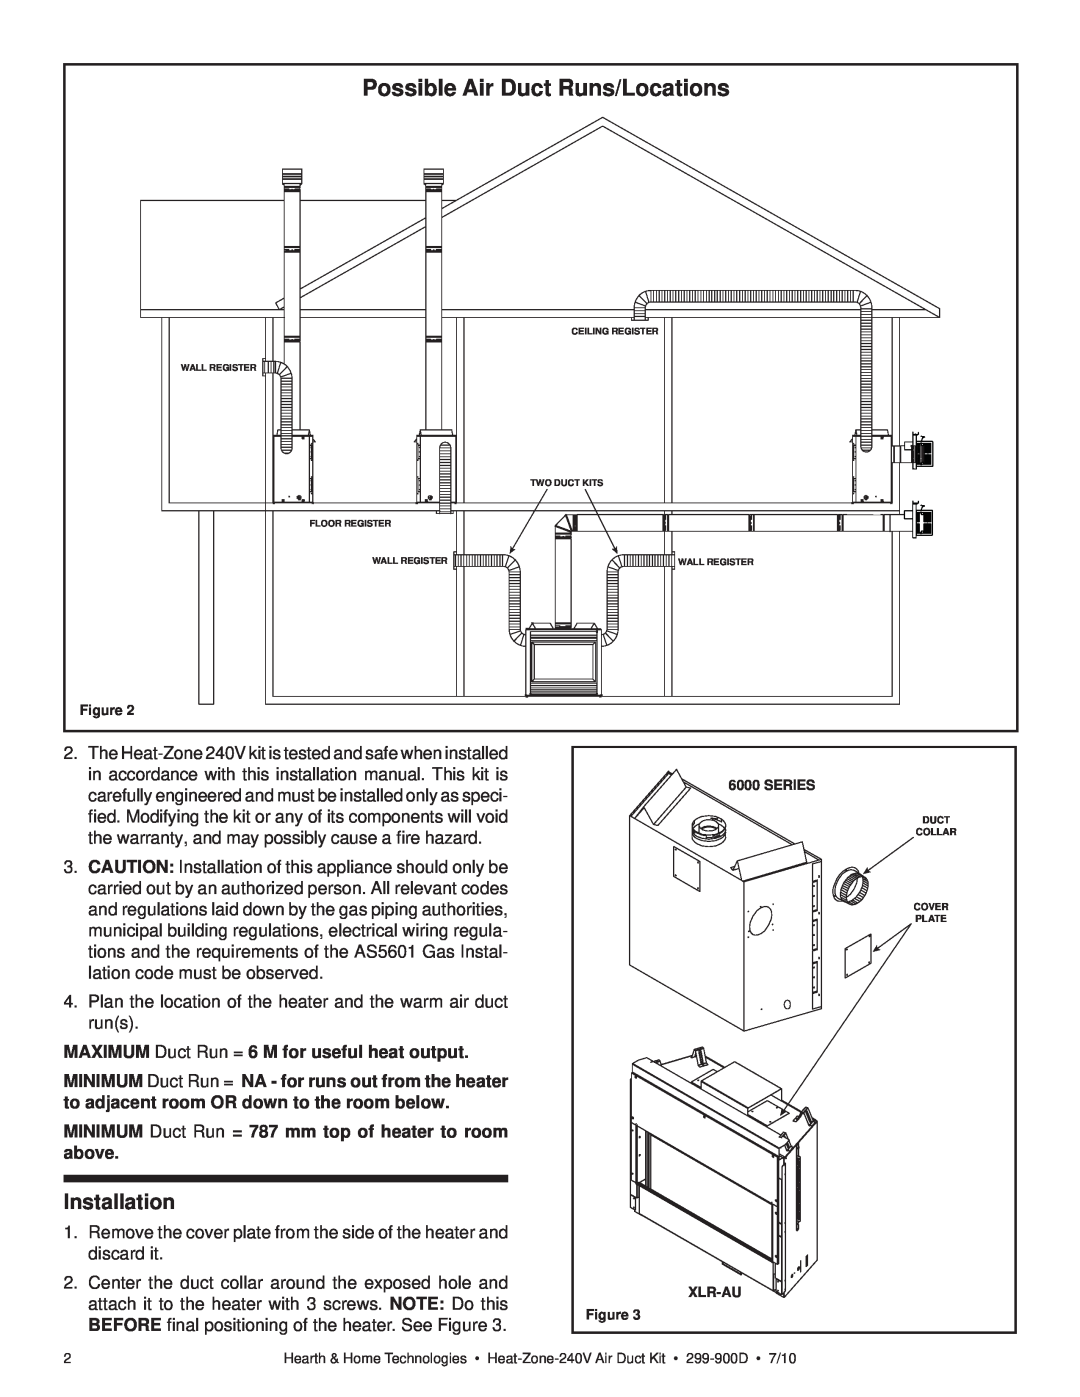 Hearth and Home Technologies 299-900D manual Installation, Possible Air Duct Runs/Locations 